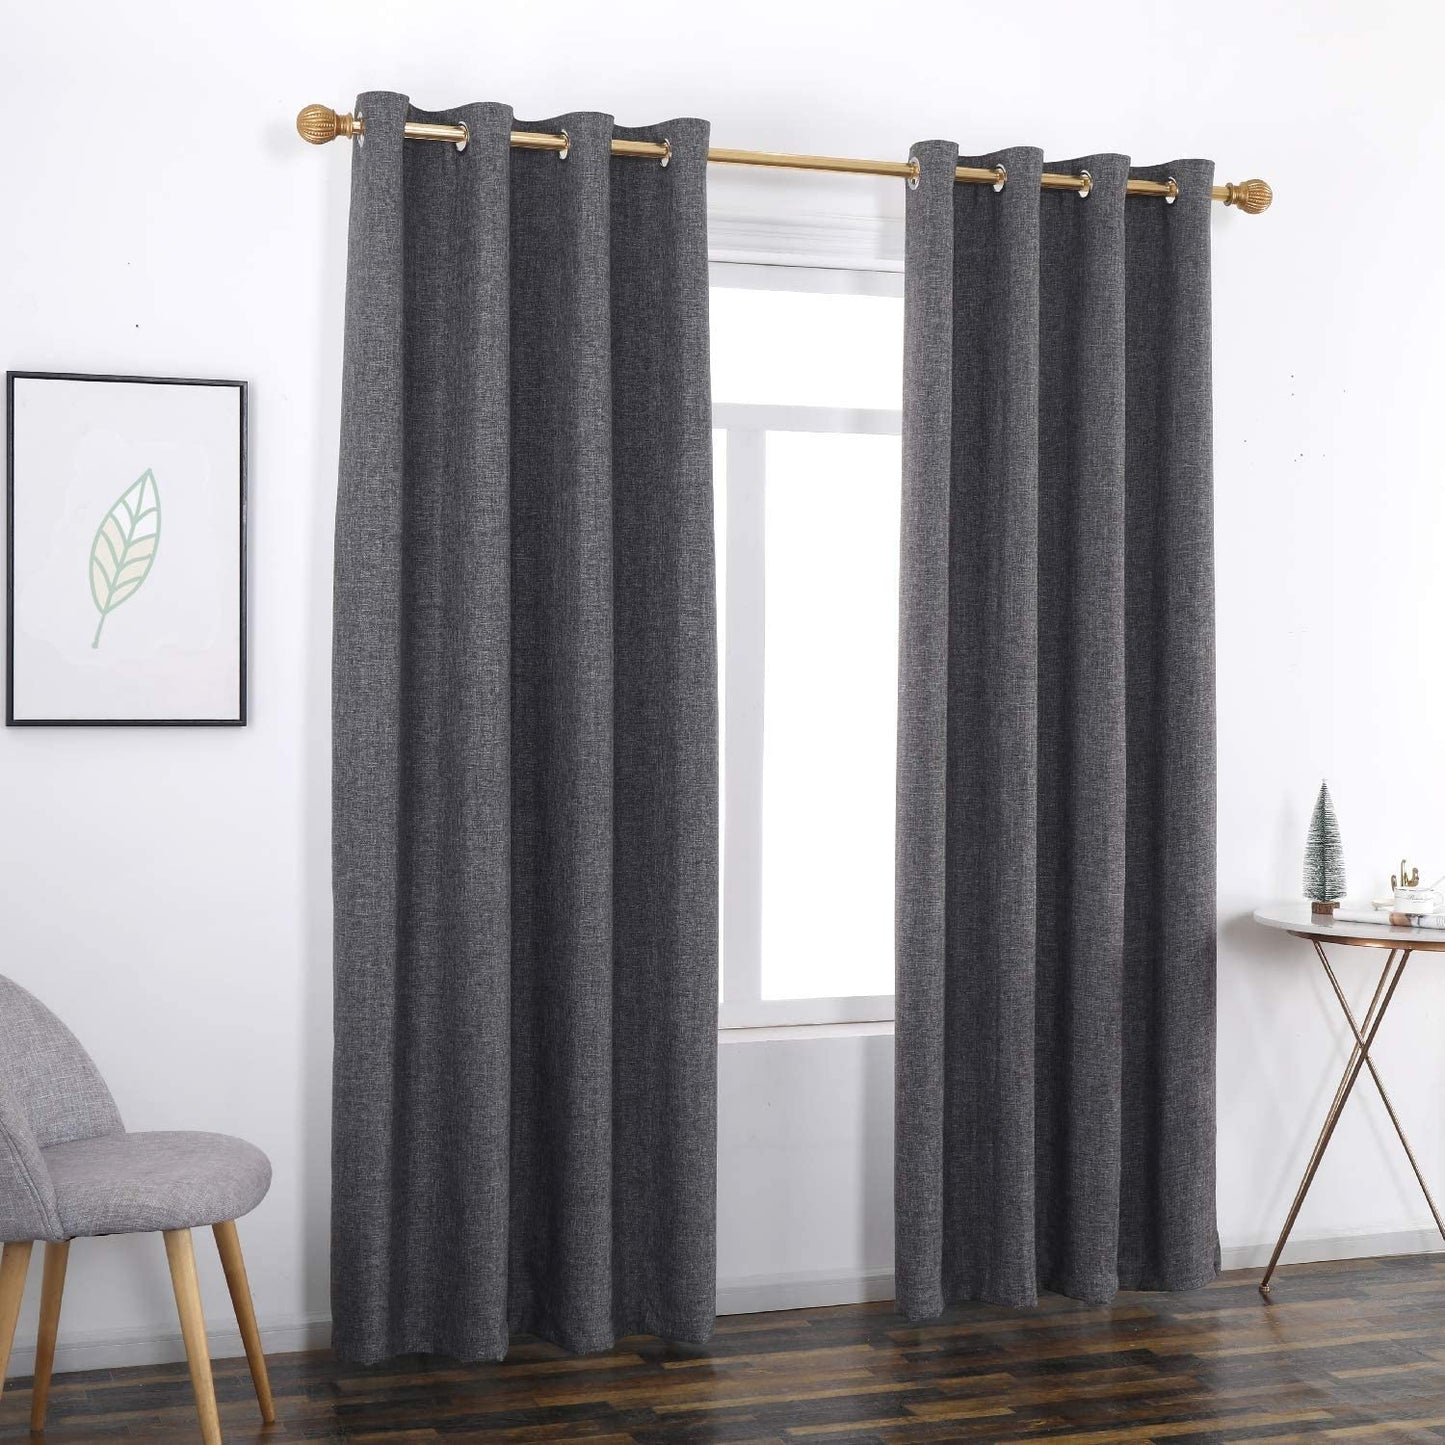 Faux Linen 100% Blackout Curtains Natural Look Durability for Bedroom